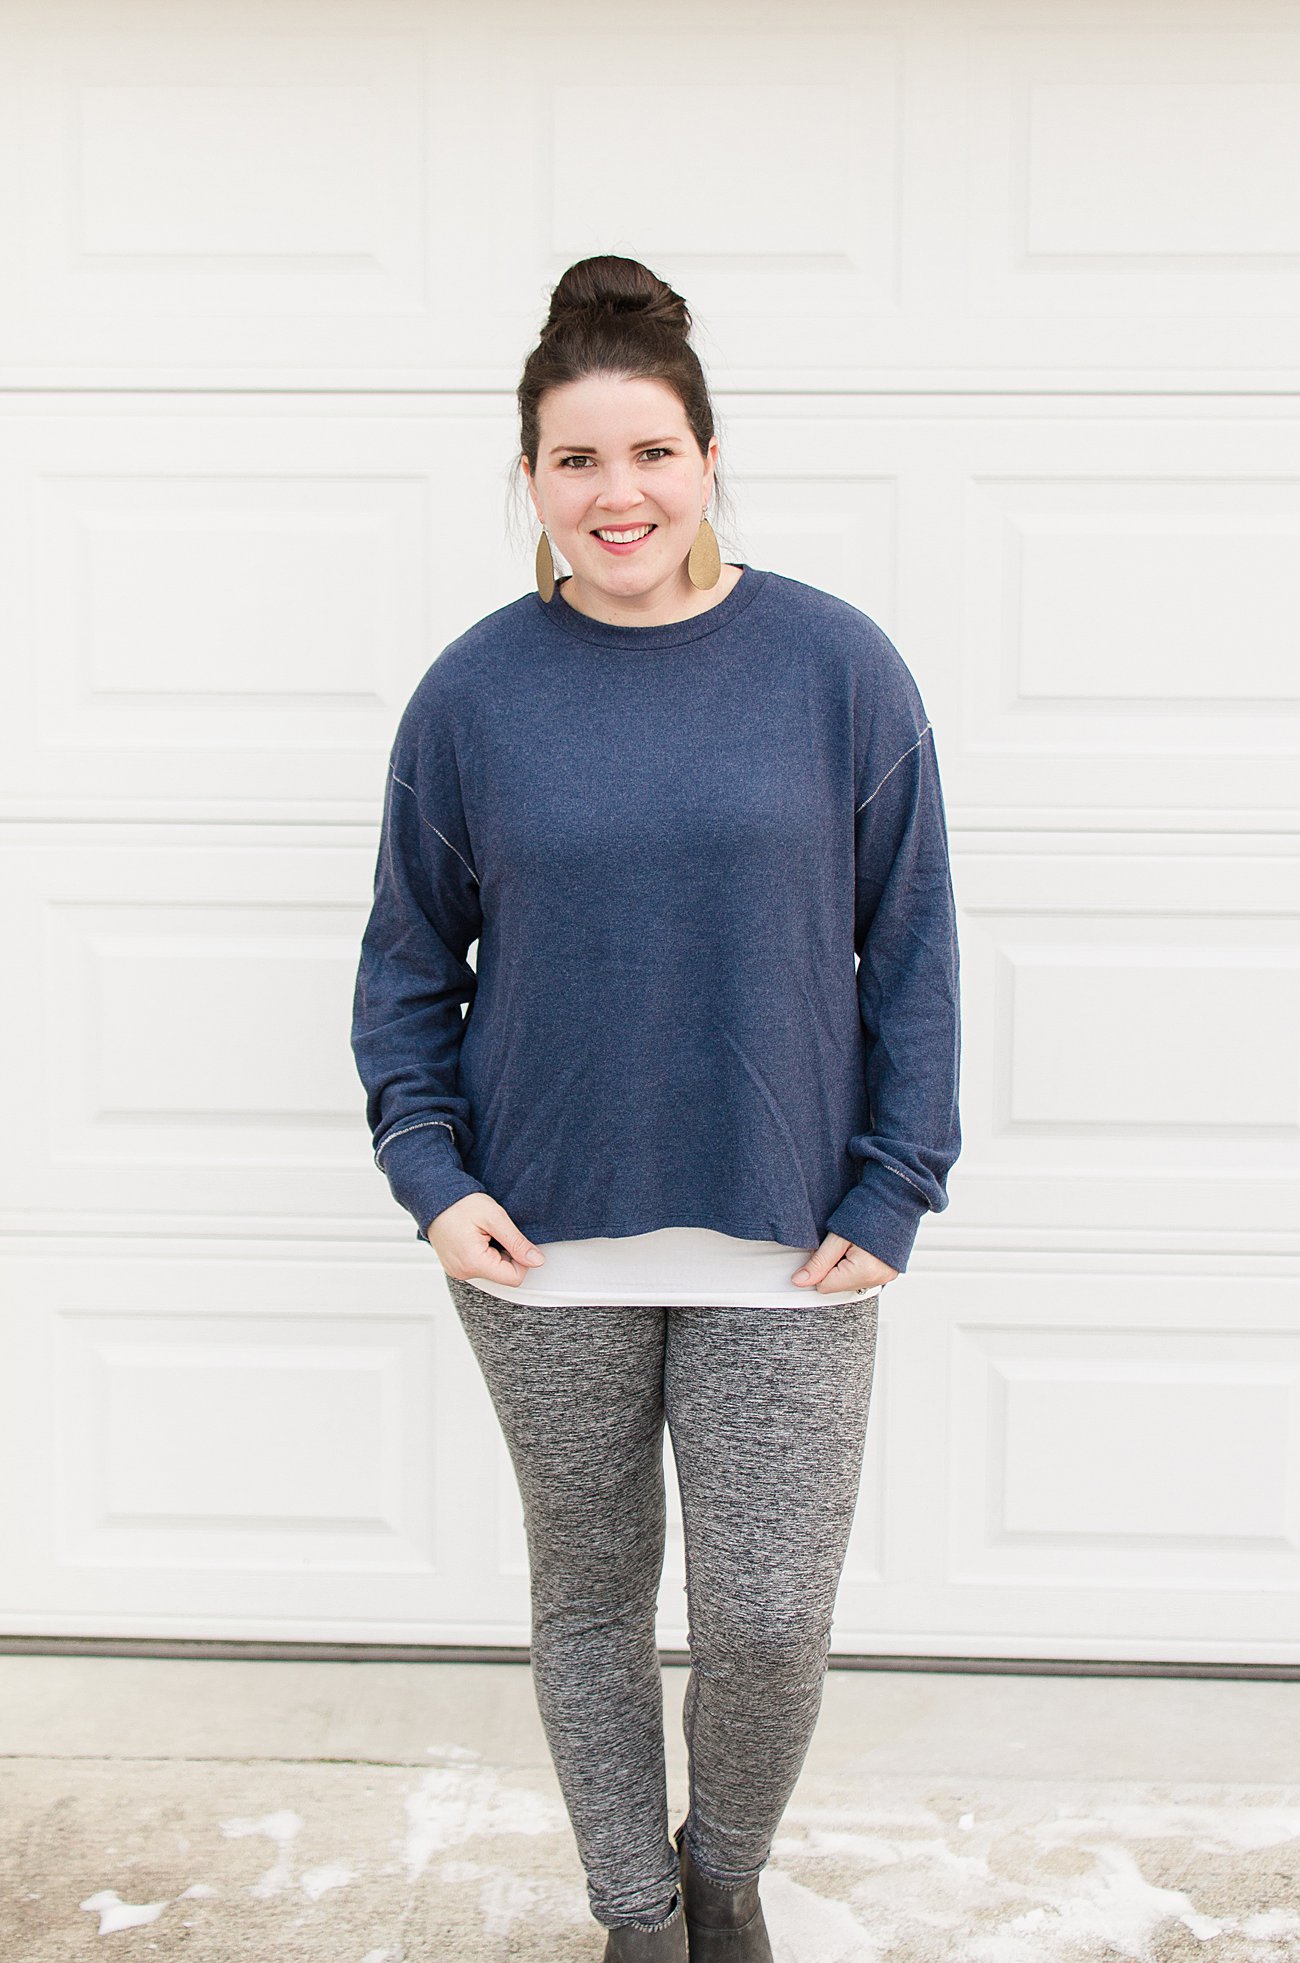 Stitch Fix LNA - Victoria Crossback Knit Top - SIZE: L - $121 (Made in the USA) - My 50th Fix & 5 Tips for Developing a Relationship with Your Stitch Fix Stylist by popular North Carolina ethical fashion blogger Still Being Molly